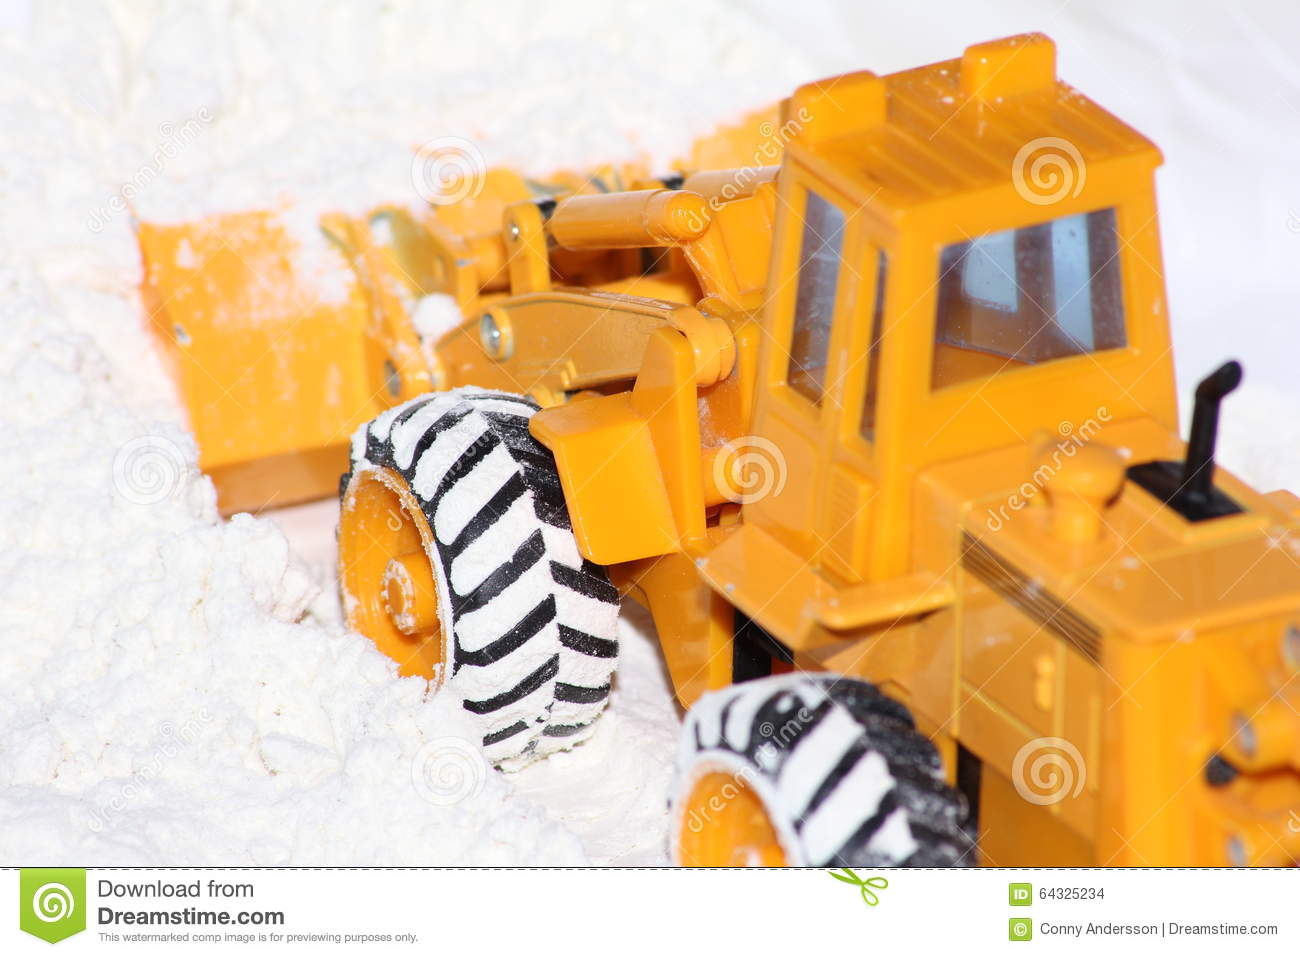 Toy Yellow Tractor Plowing Some Snow